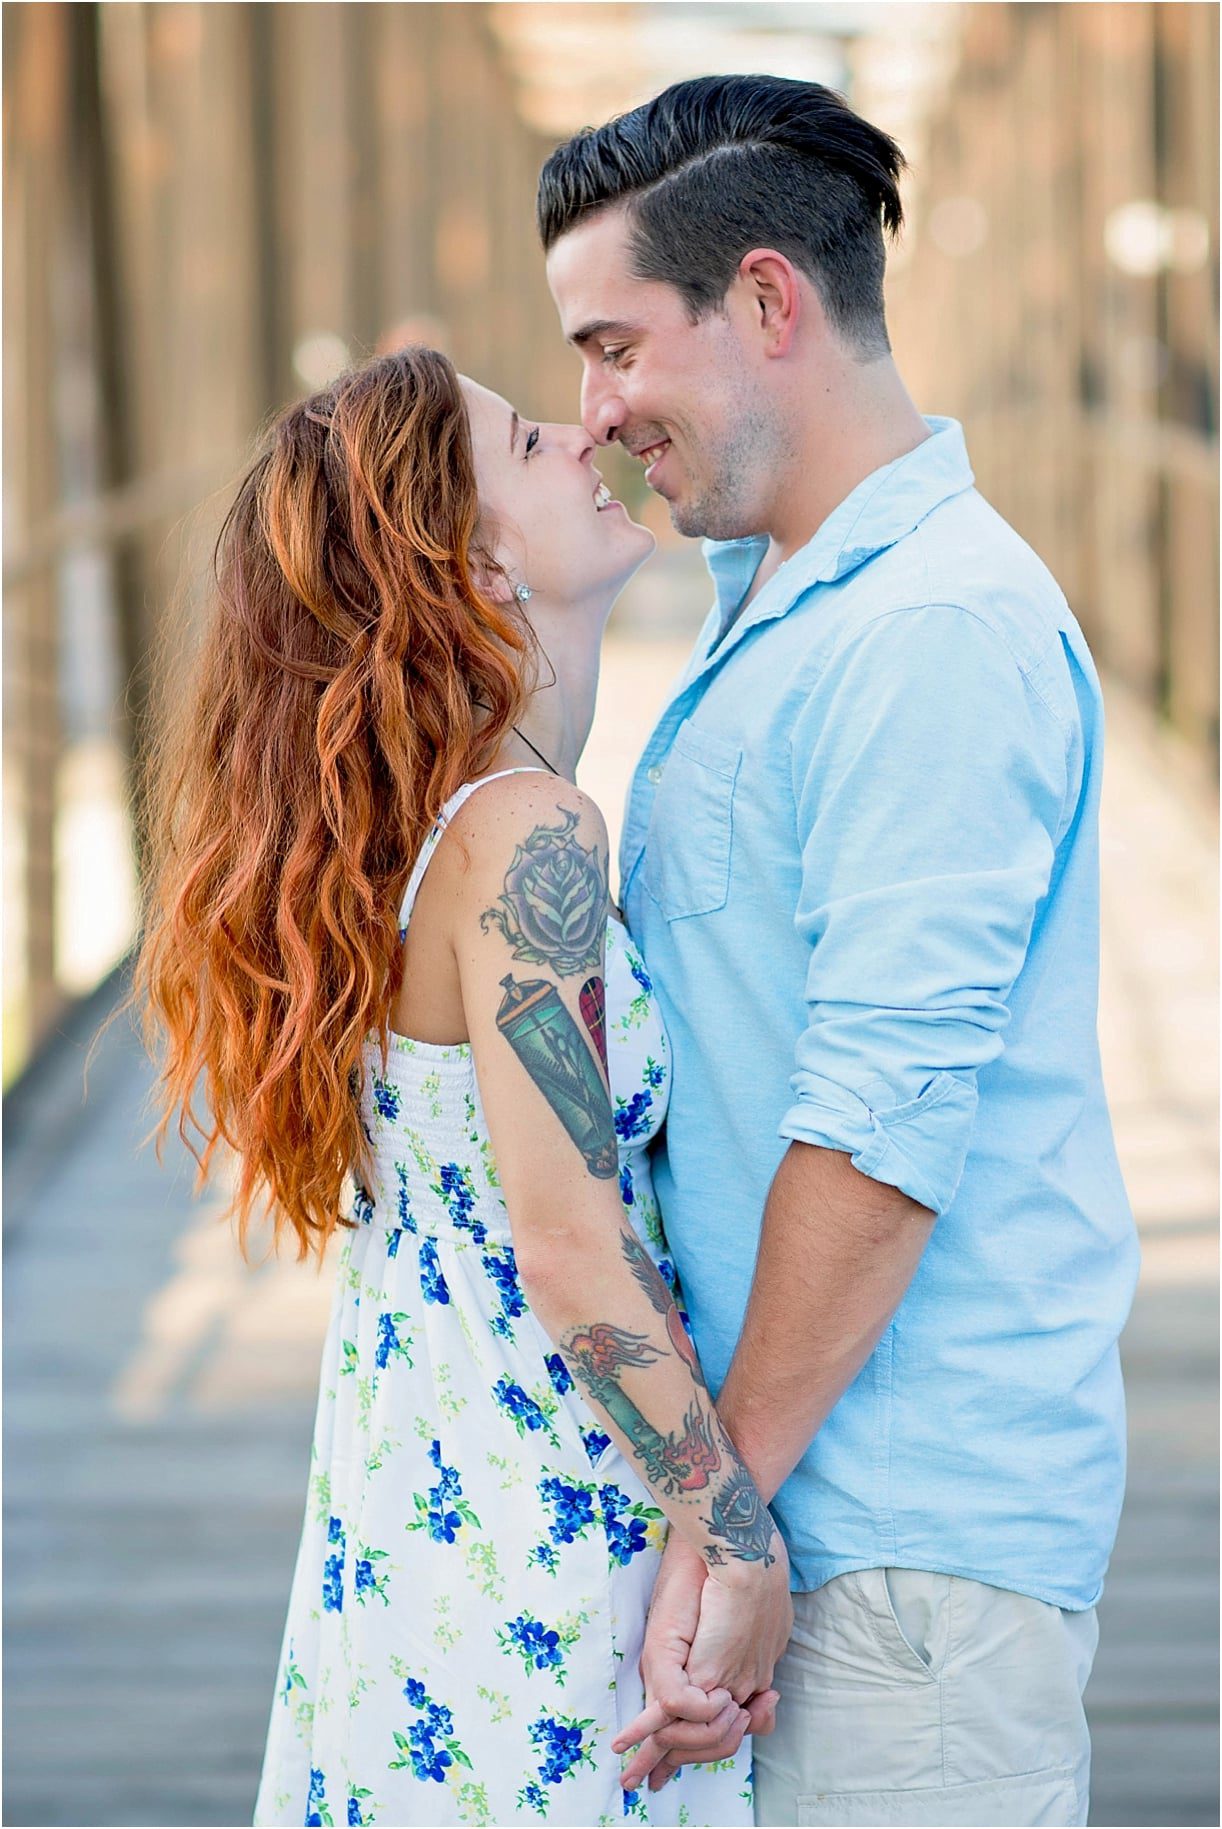 What to Do After Getting Engaged | Next Steps After Engagement